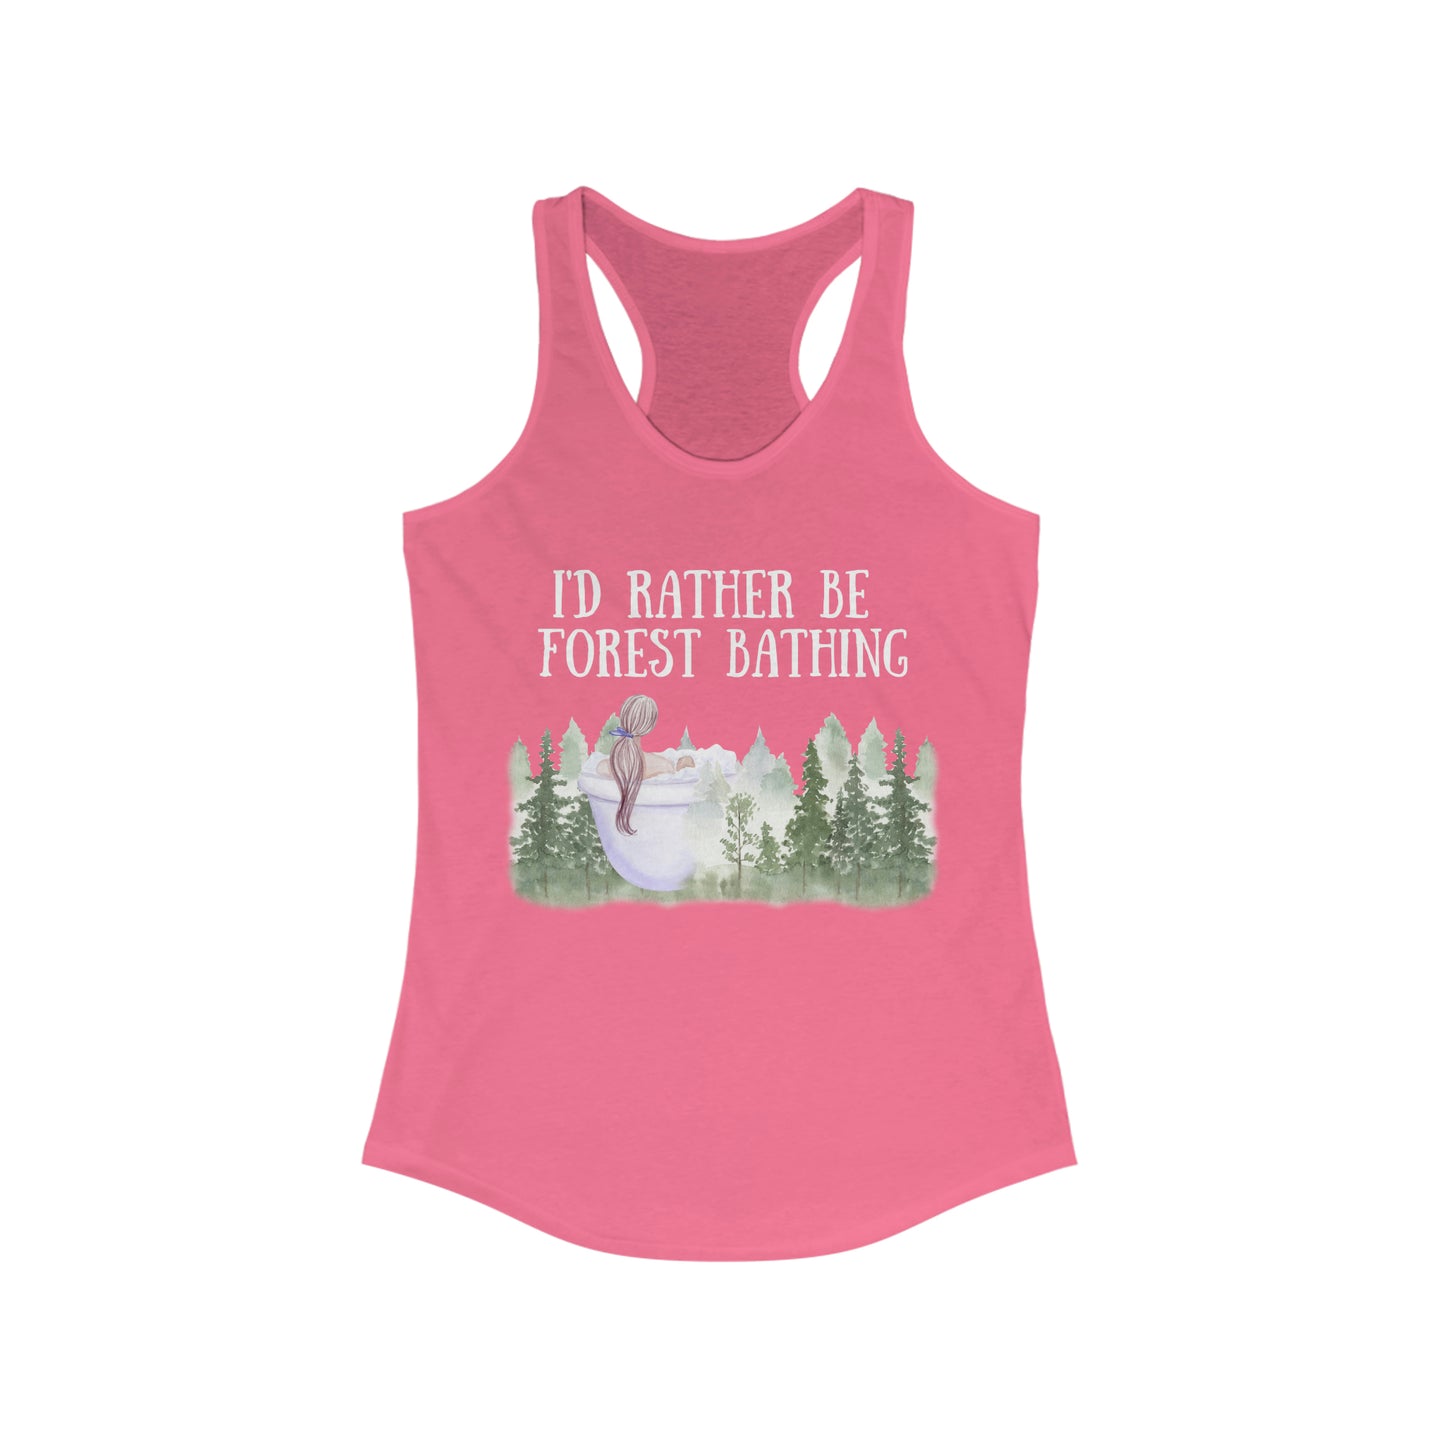 I'd Rather be Forest Bathing Tank